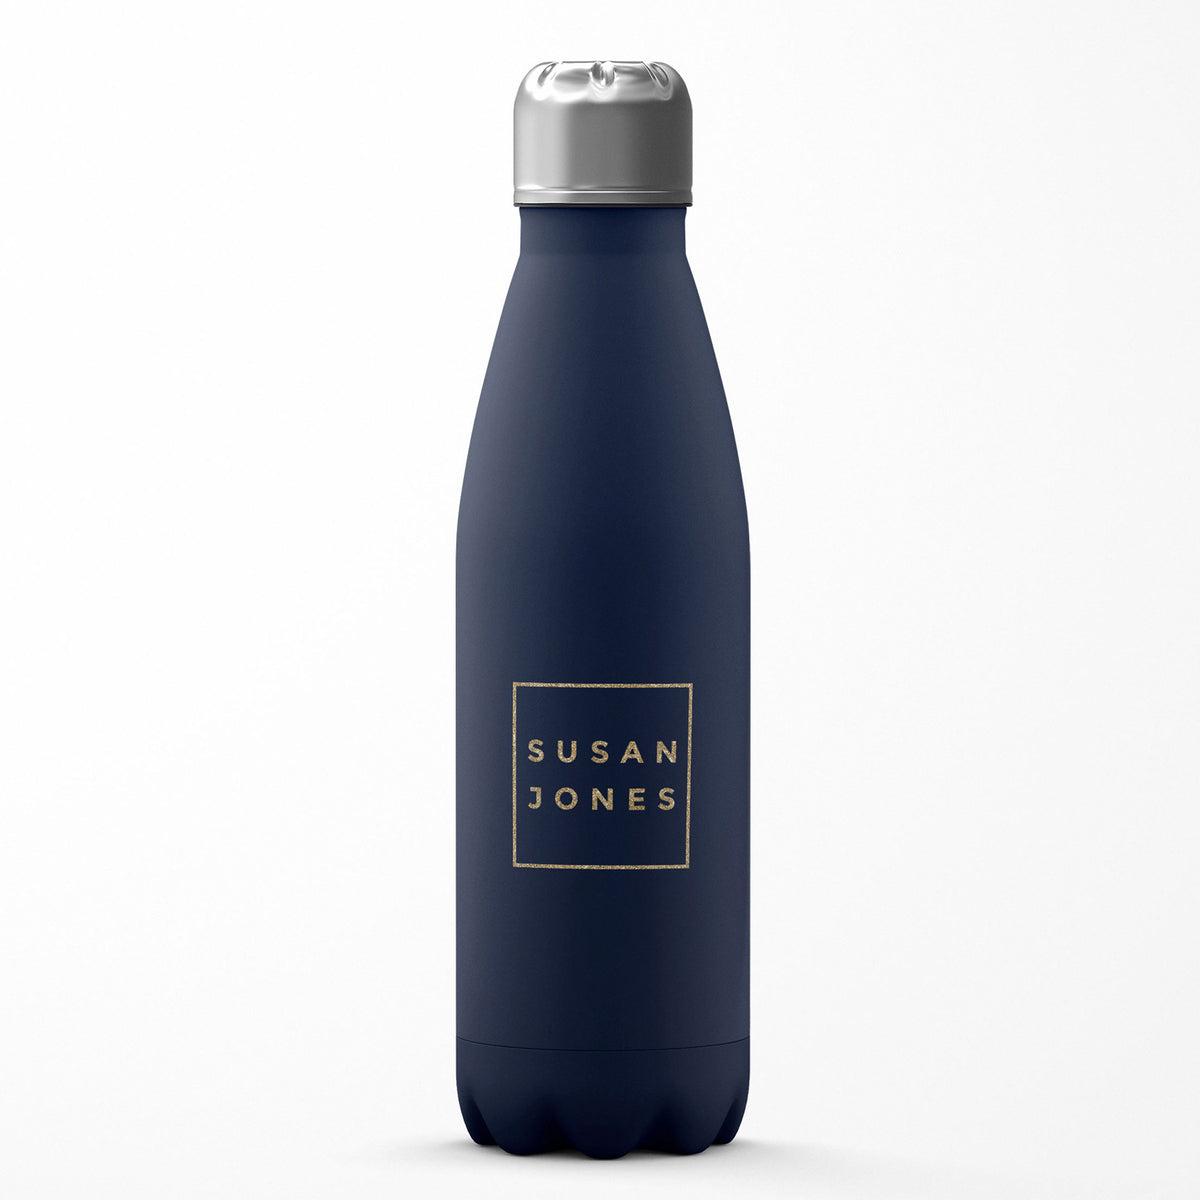 Personalised Water Bottle Name Golden in Square